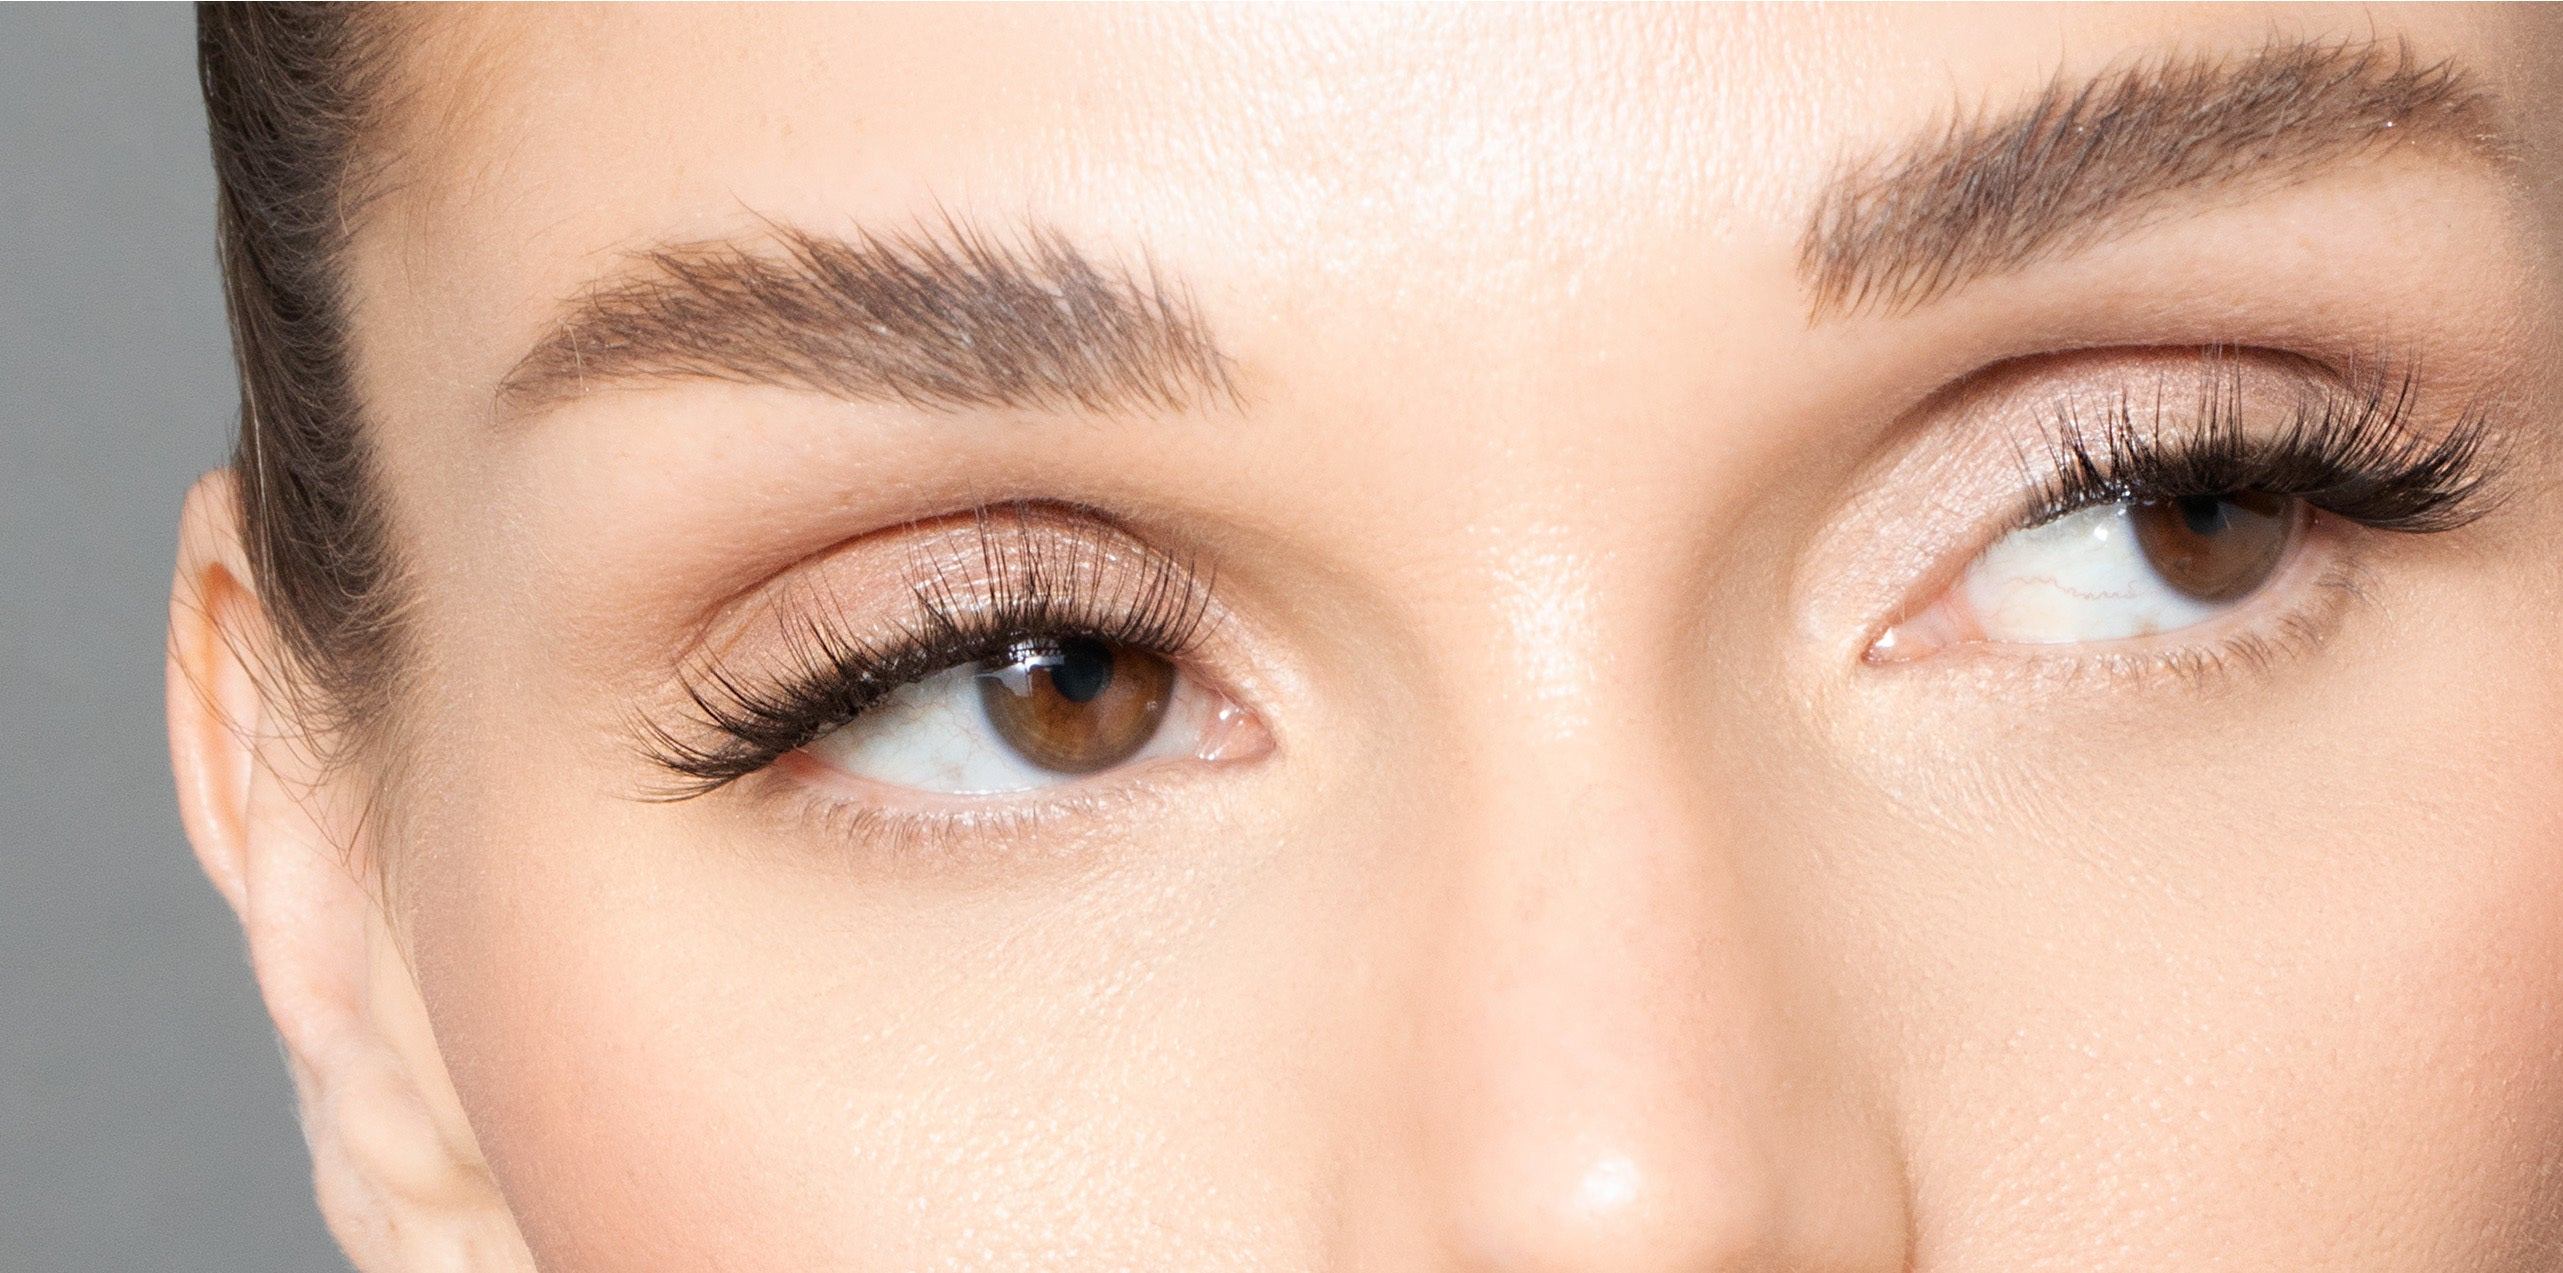 HOW TO CREATE A DREAMY, ETHEREAL LASH LOOK